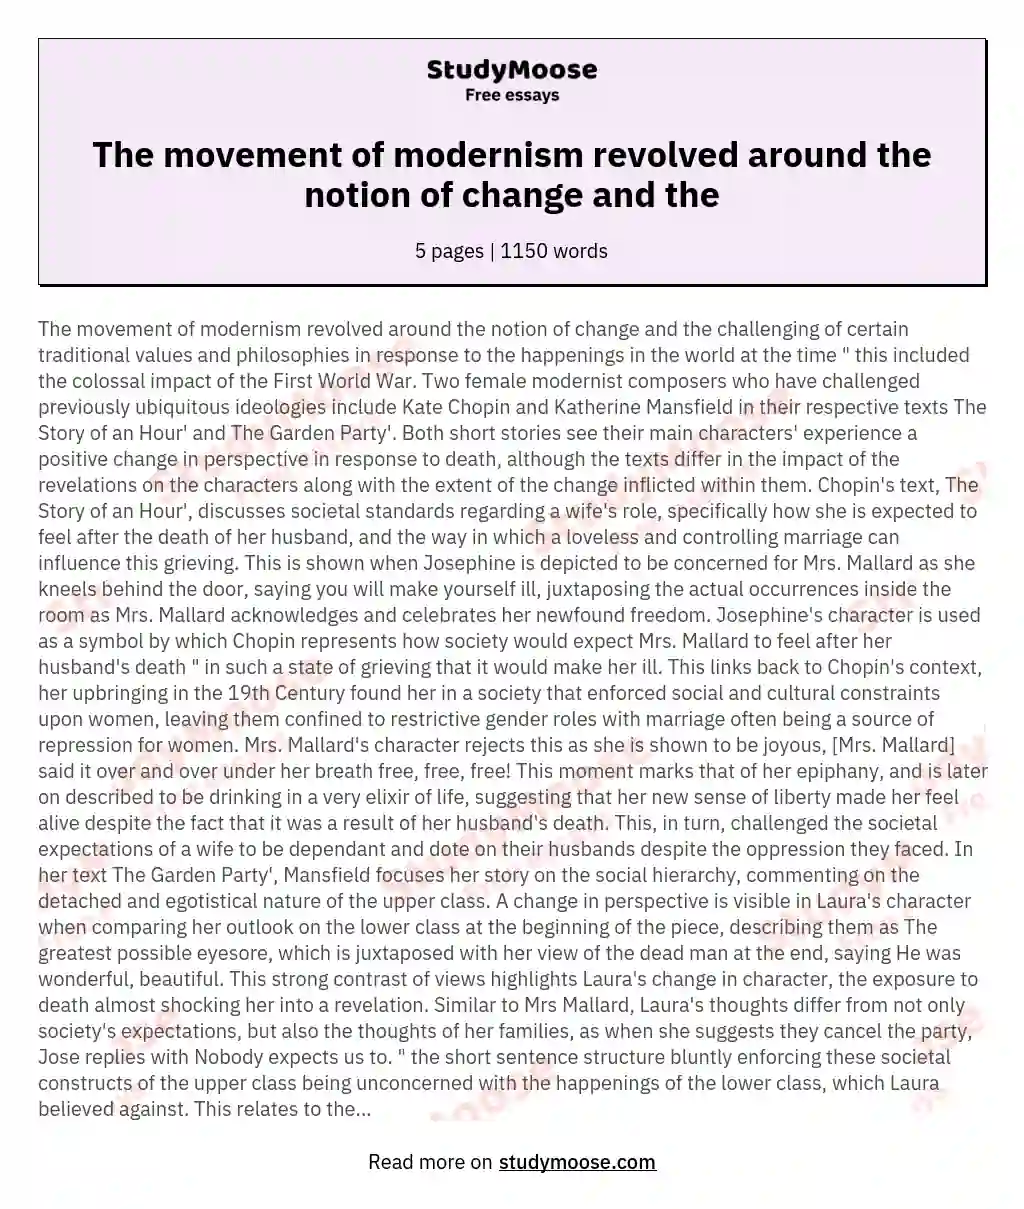 The movement of modernism revolved around the notion of change and the essay